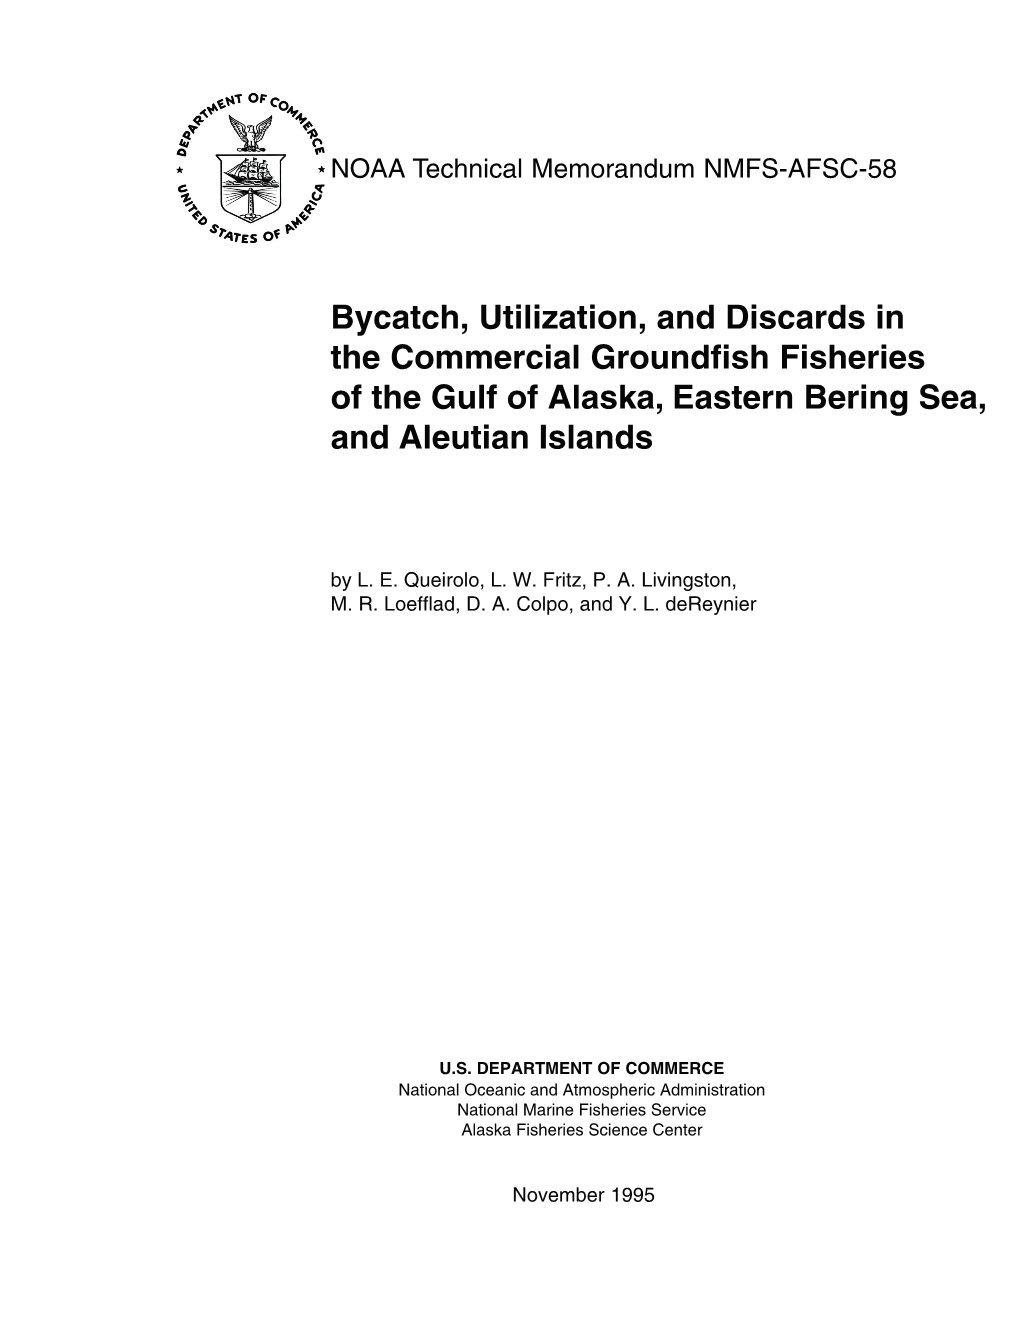 Bycatch, Utilization, and Discards in the Commercial Groundfish Fisheries of the Gulf of Alaska, Eastern Bering Sea, and Aleutian Islands